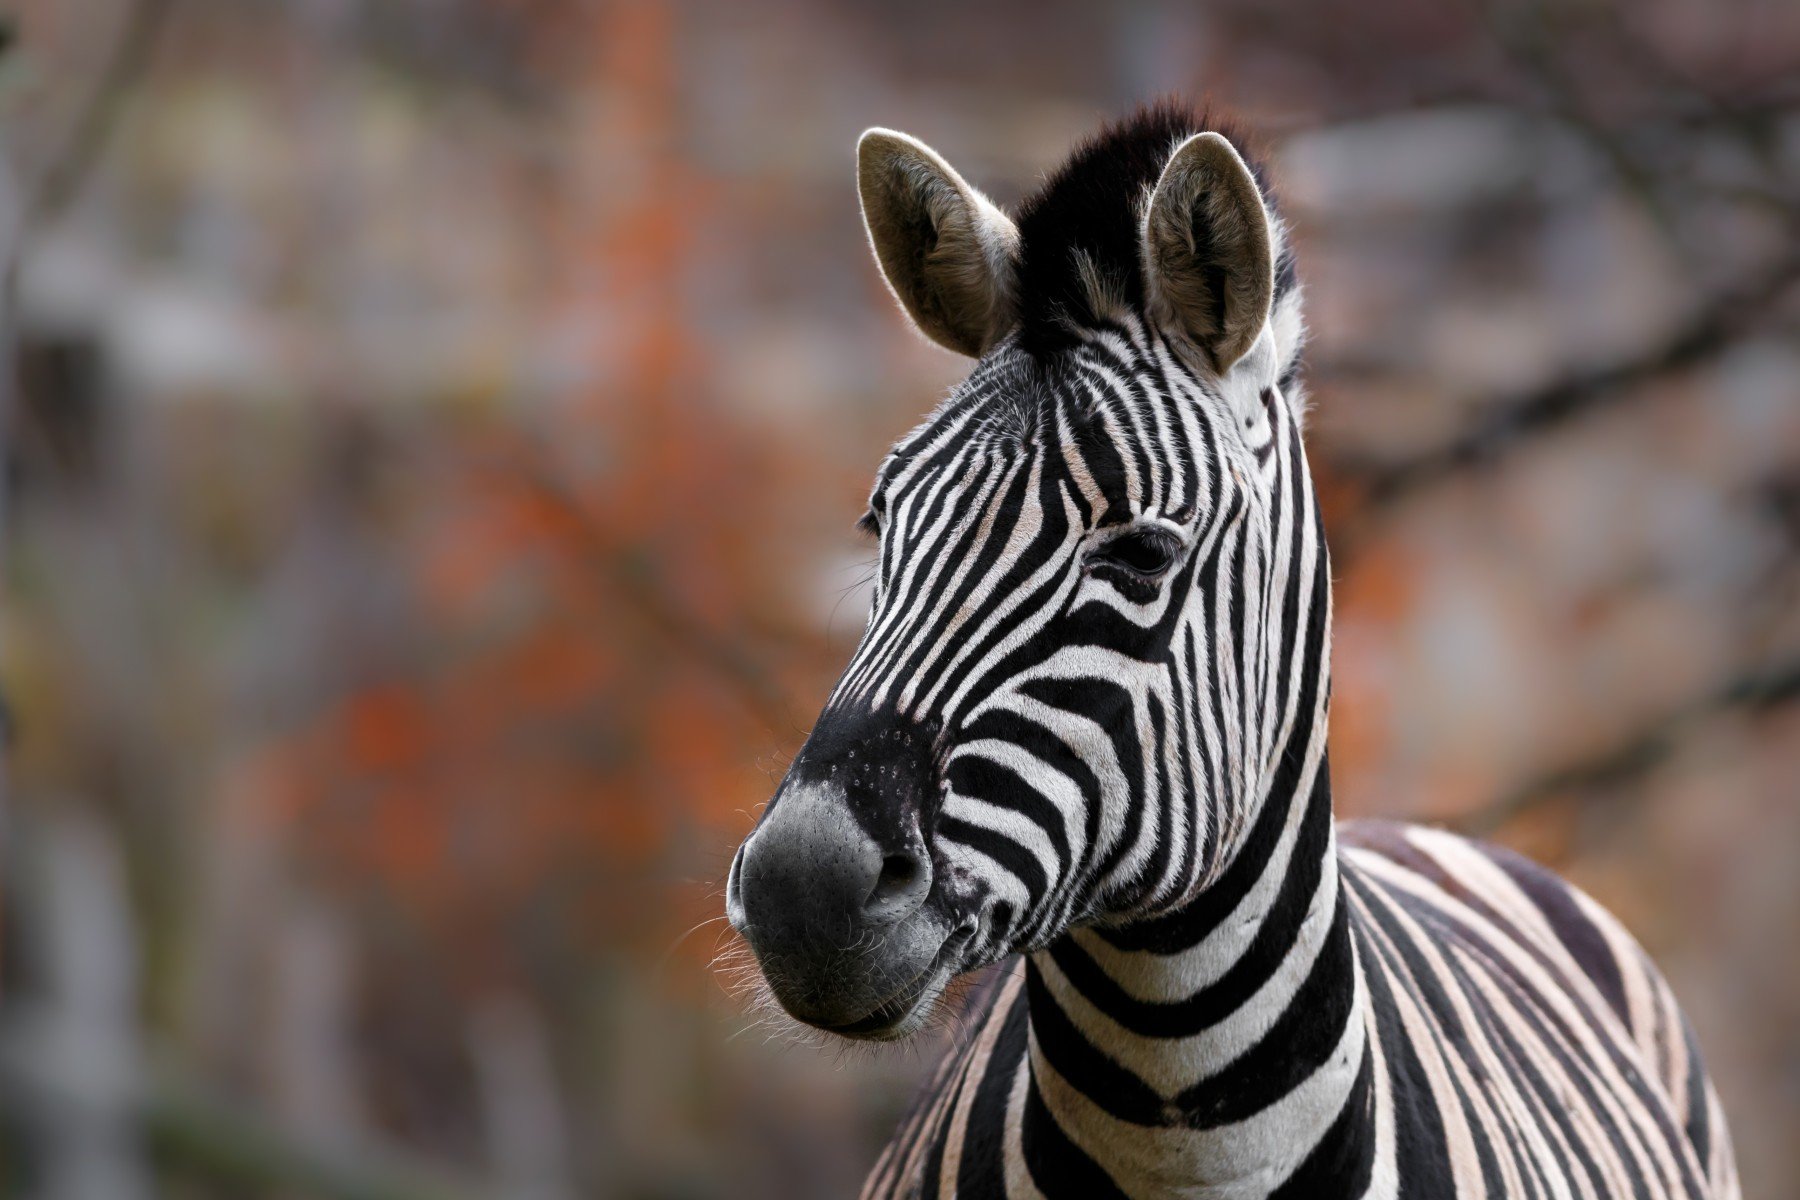 Zebras came to call…Interesting zebra facts…A circle among the